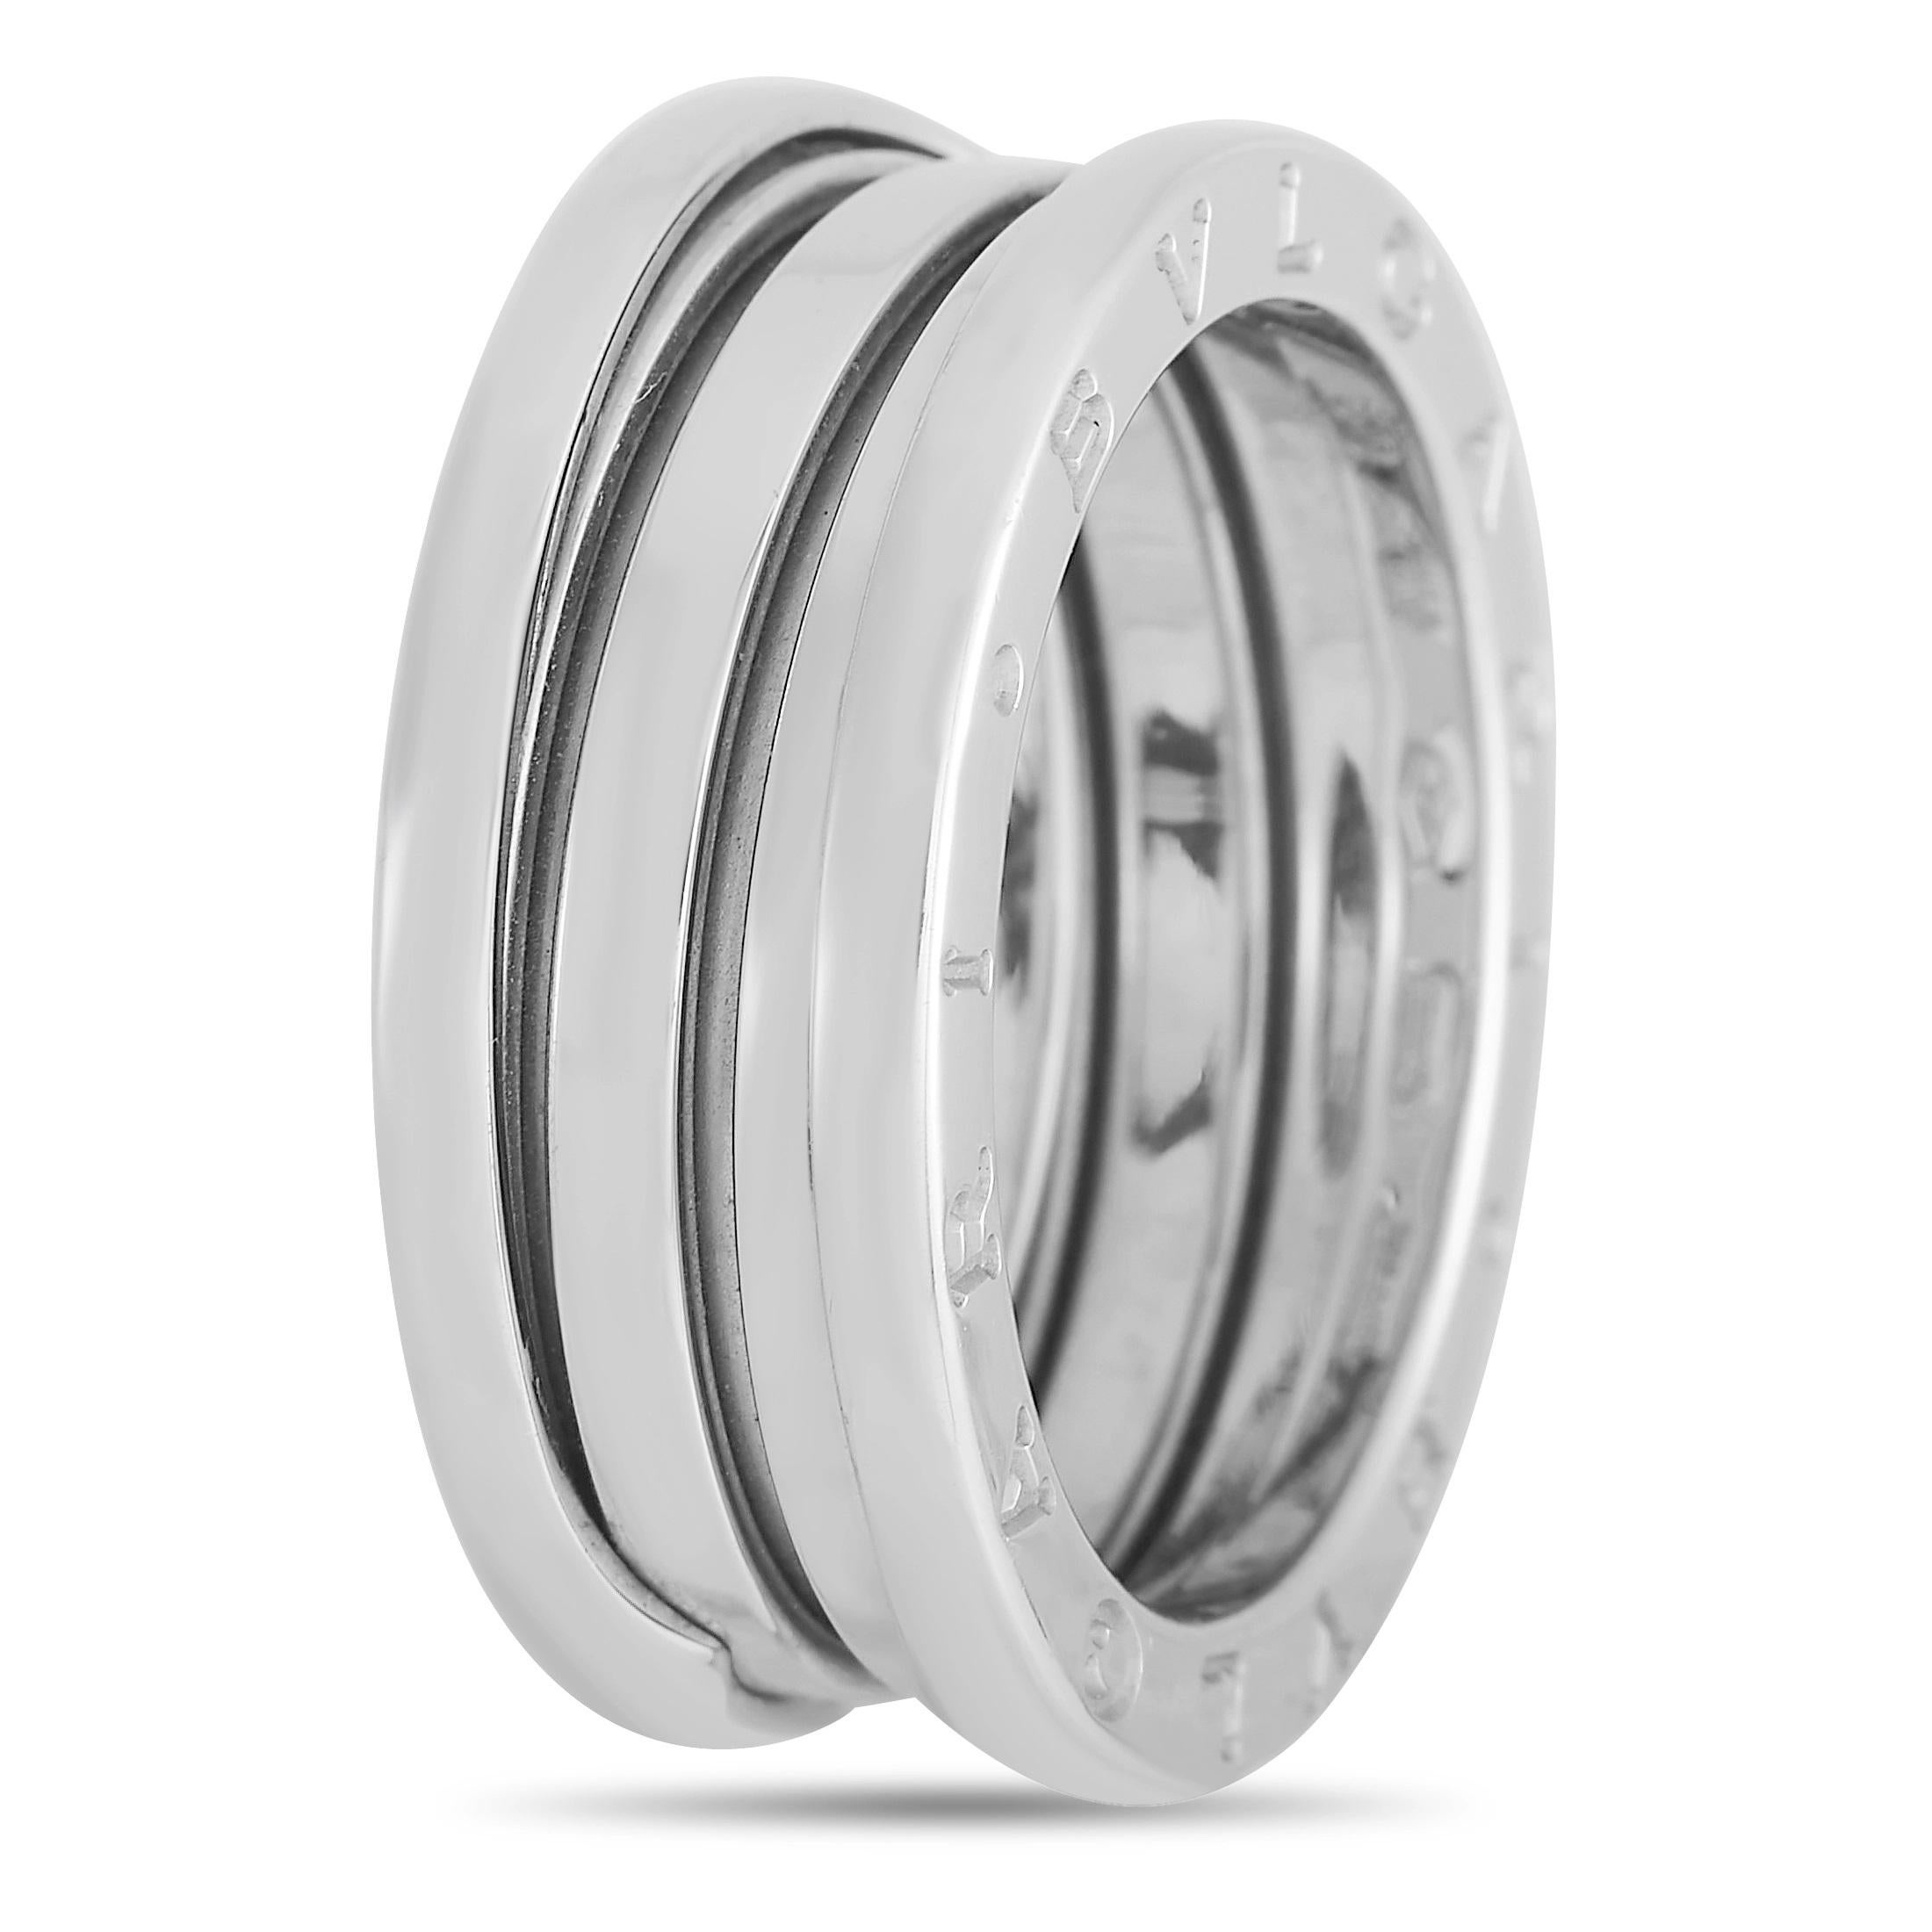 This Bvlgari B Zero 18K White Gold Ring is a unique offering. The design of this simple band was inspired by the Colosseum in Rome, reflecting its timeless nature. The band is made from 18K White Gold with a band thickness of 7 mm, and a total